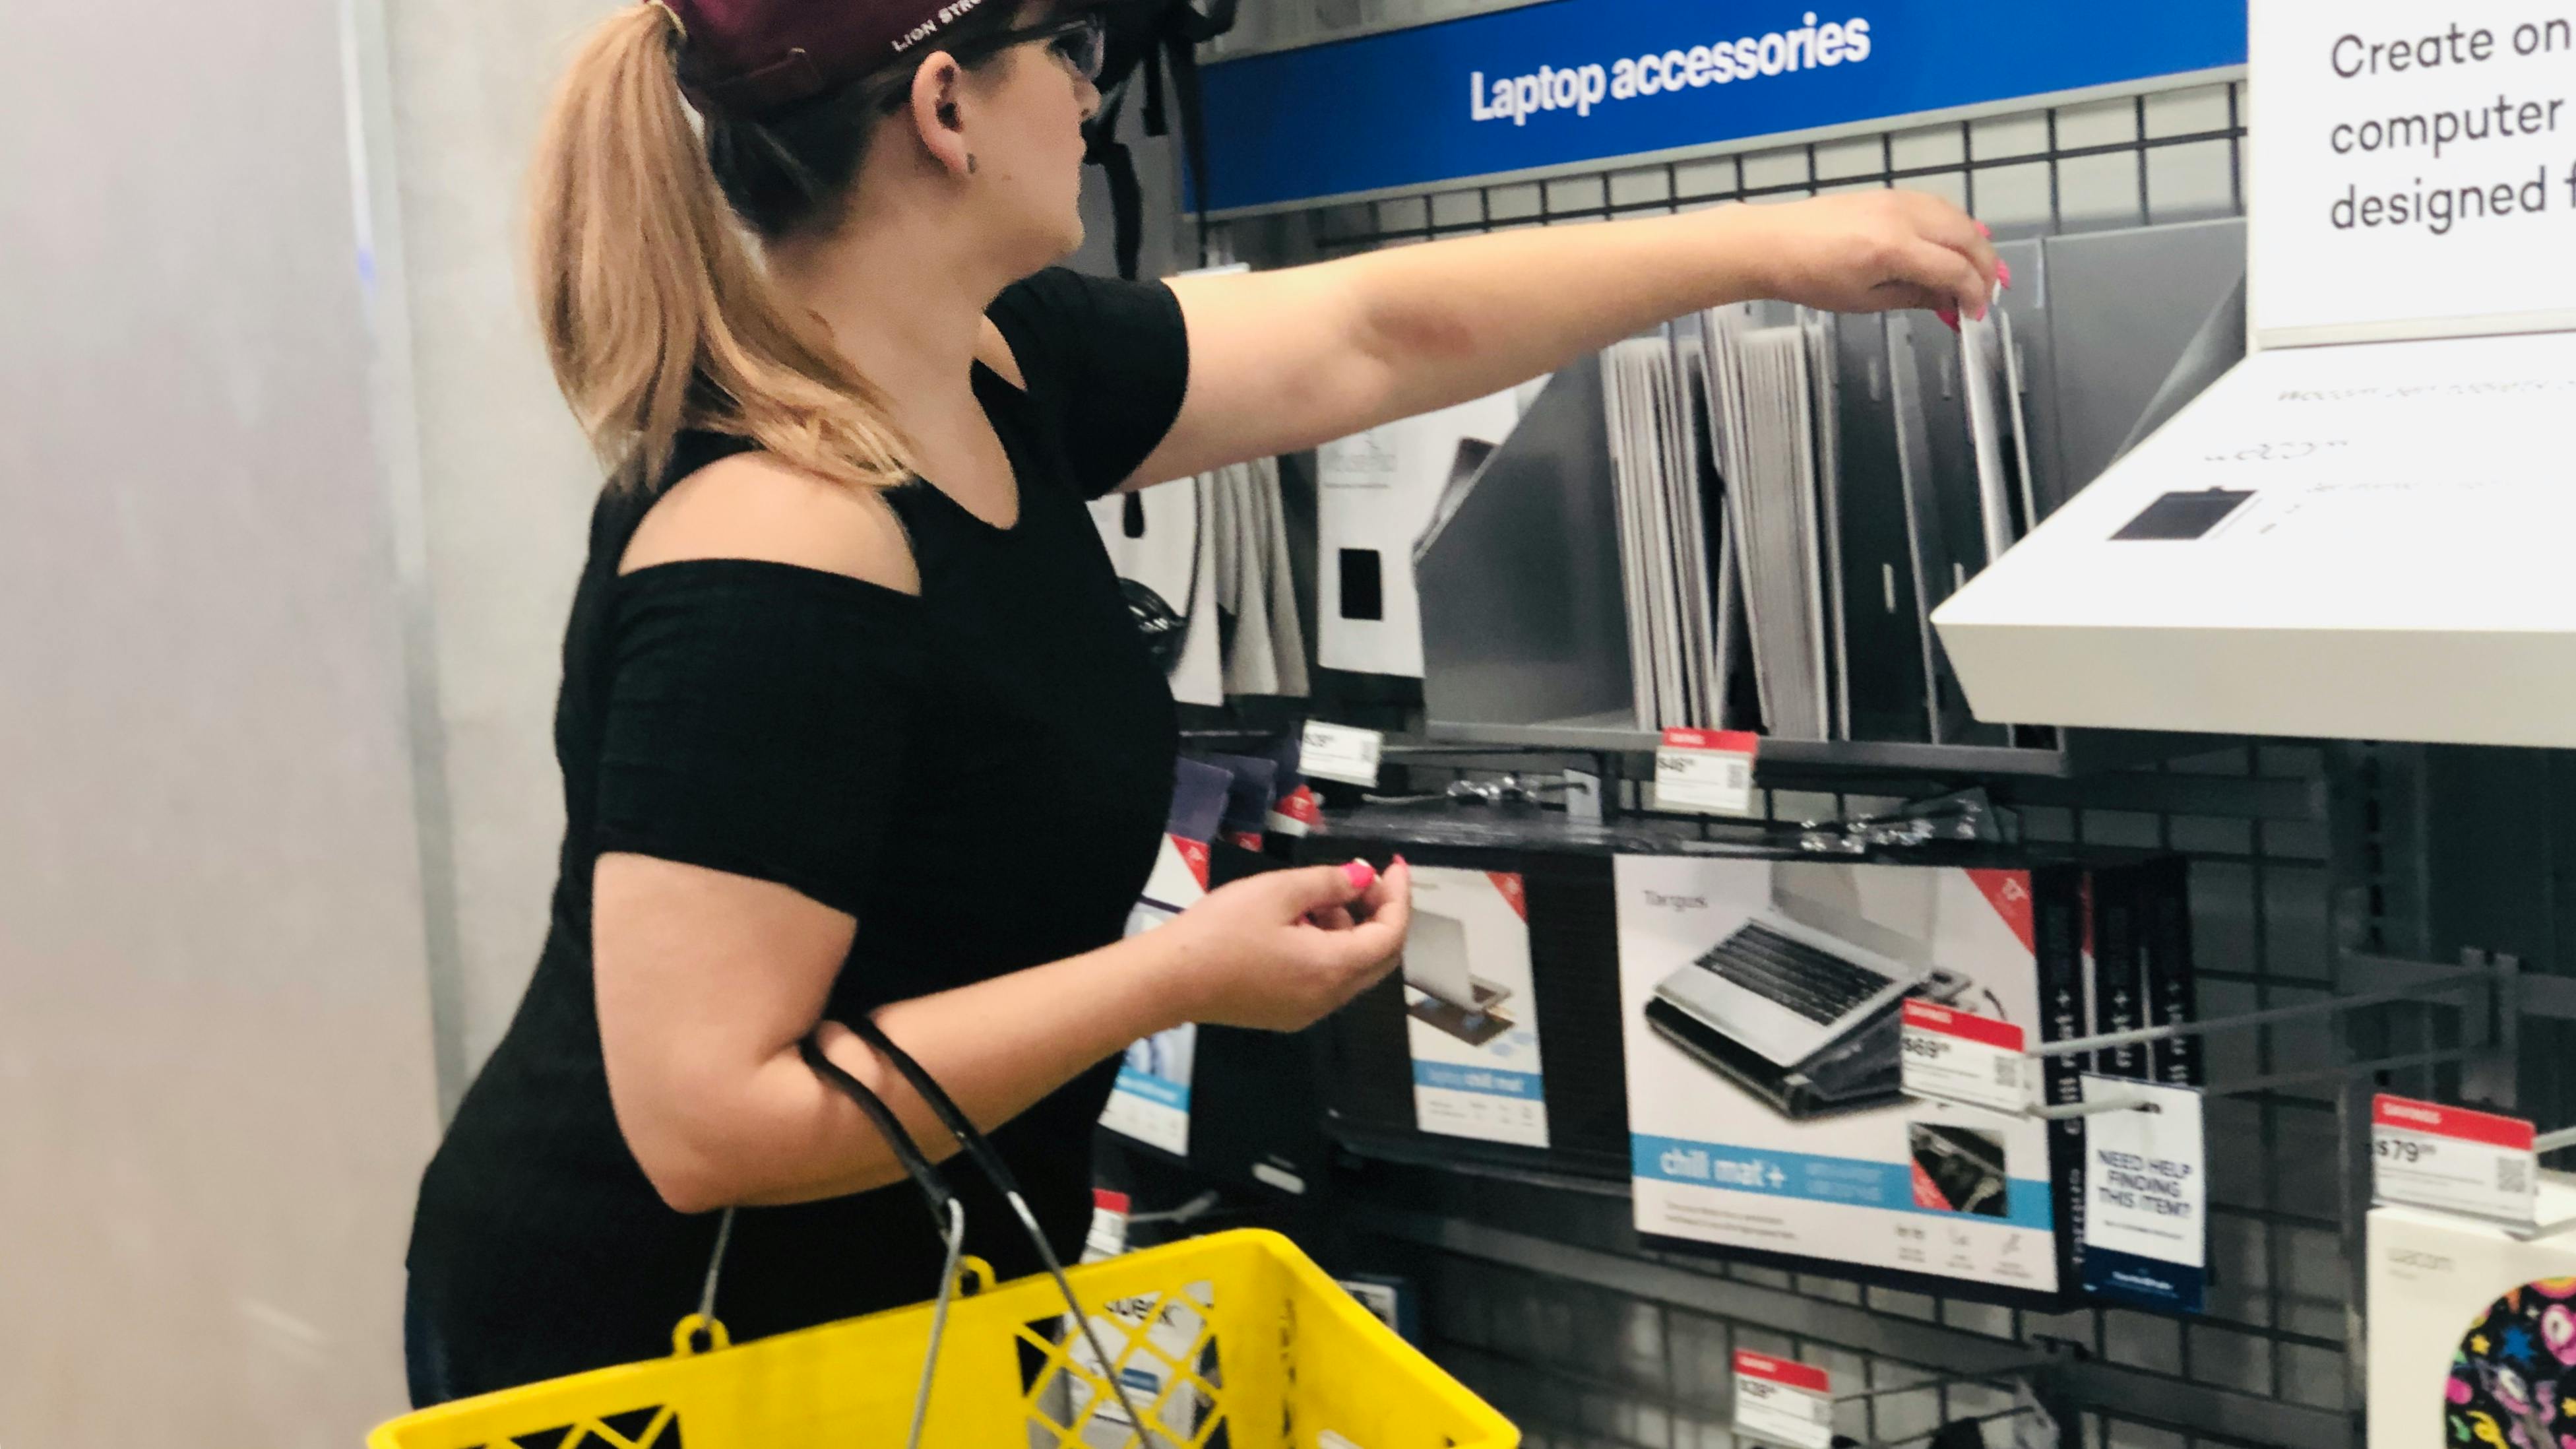 woman reaches for a laptop cord on best buy accessories wall